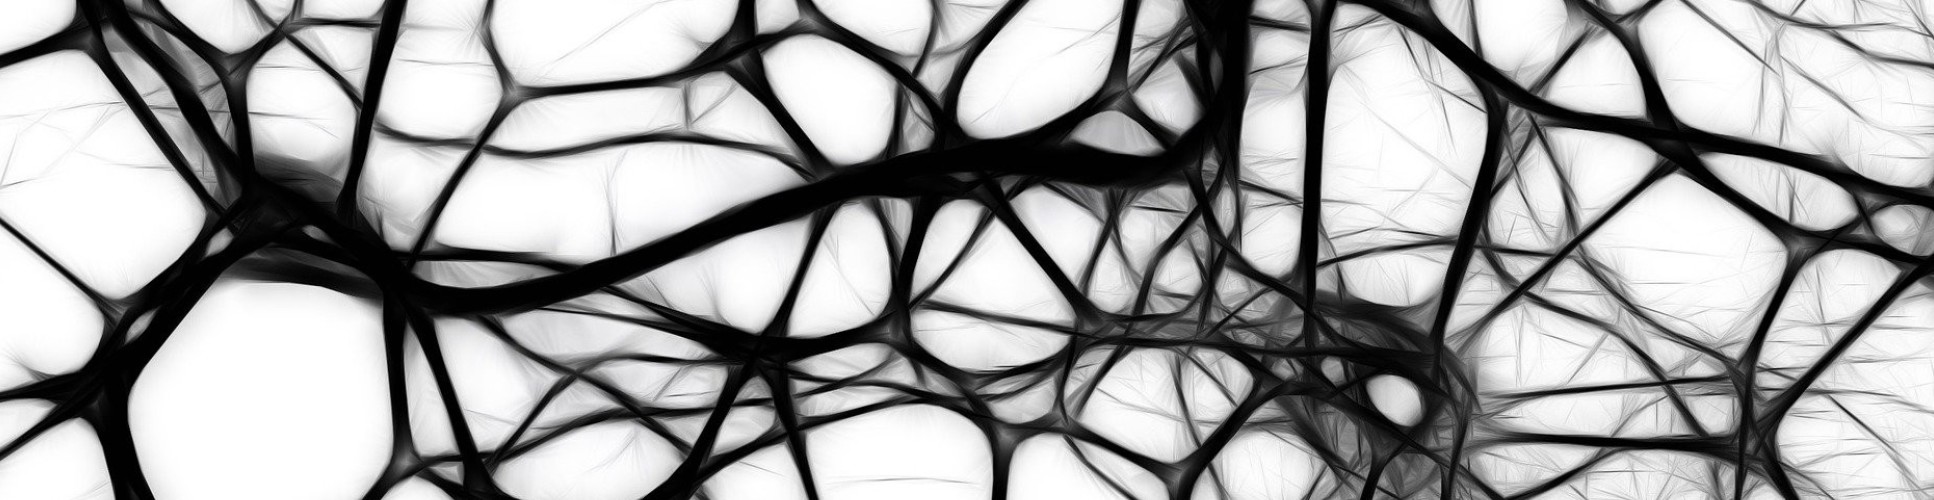 Artist impression of neural networks that look like a complex black web over a white background. Gerd Altmann for Pixabay.